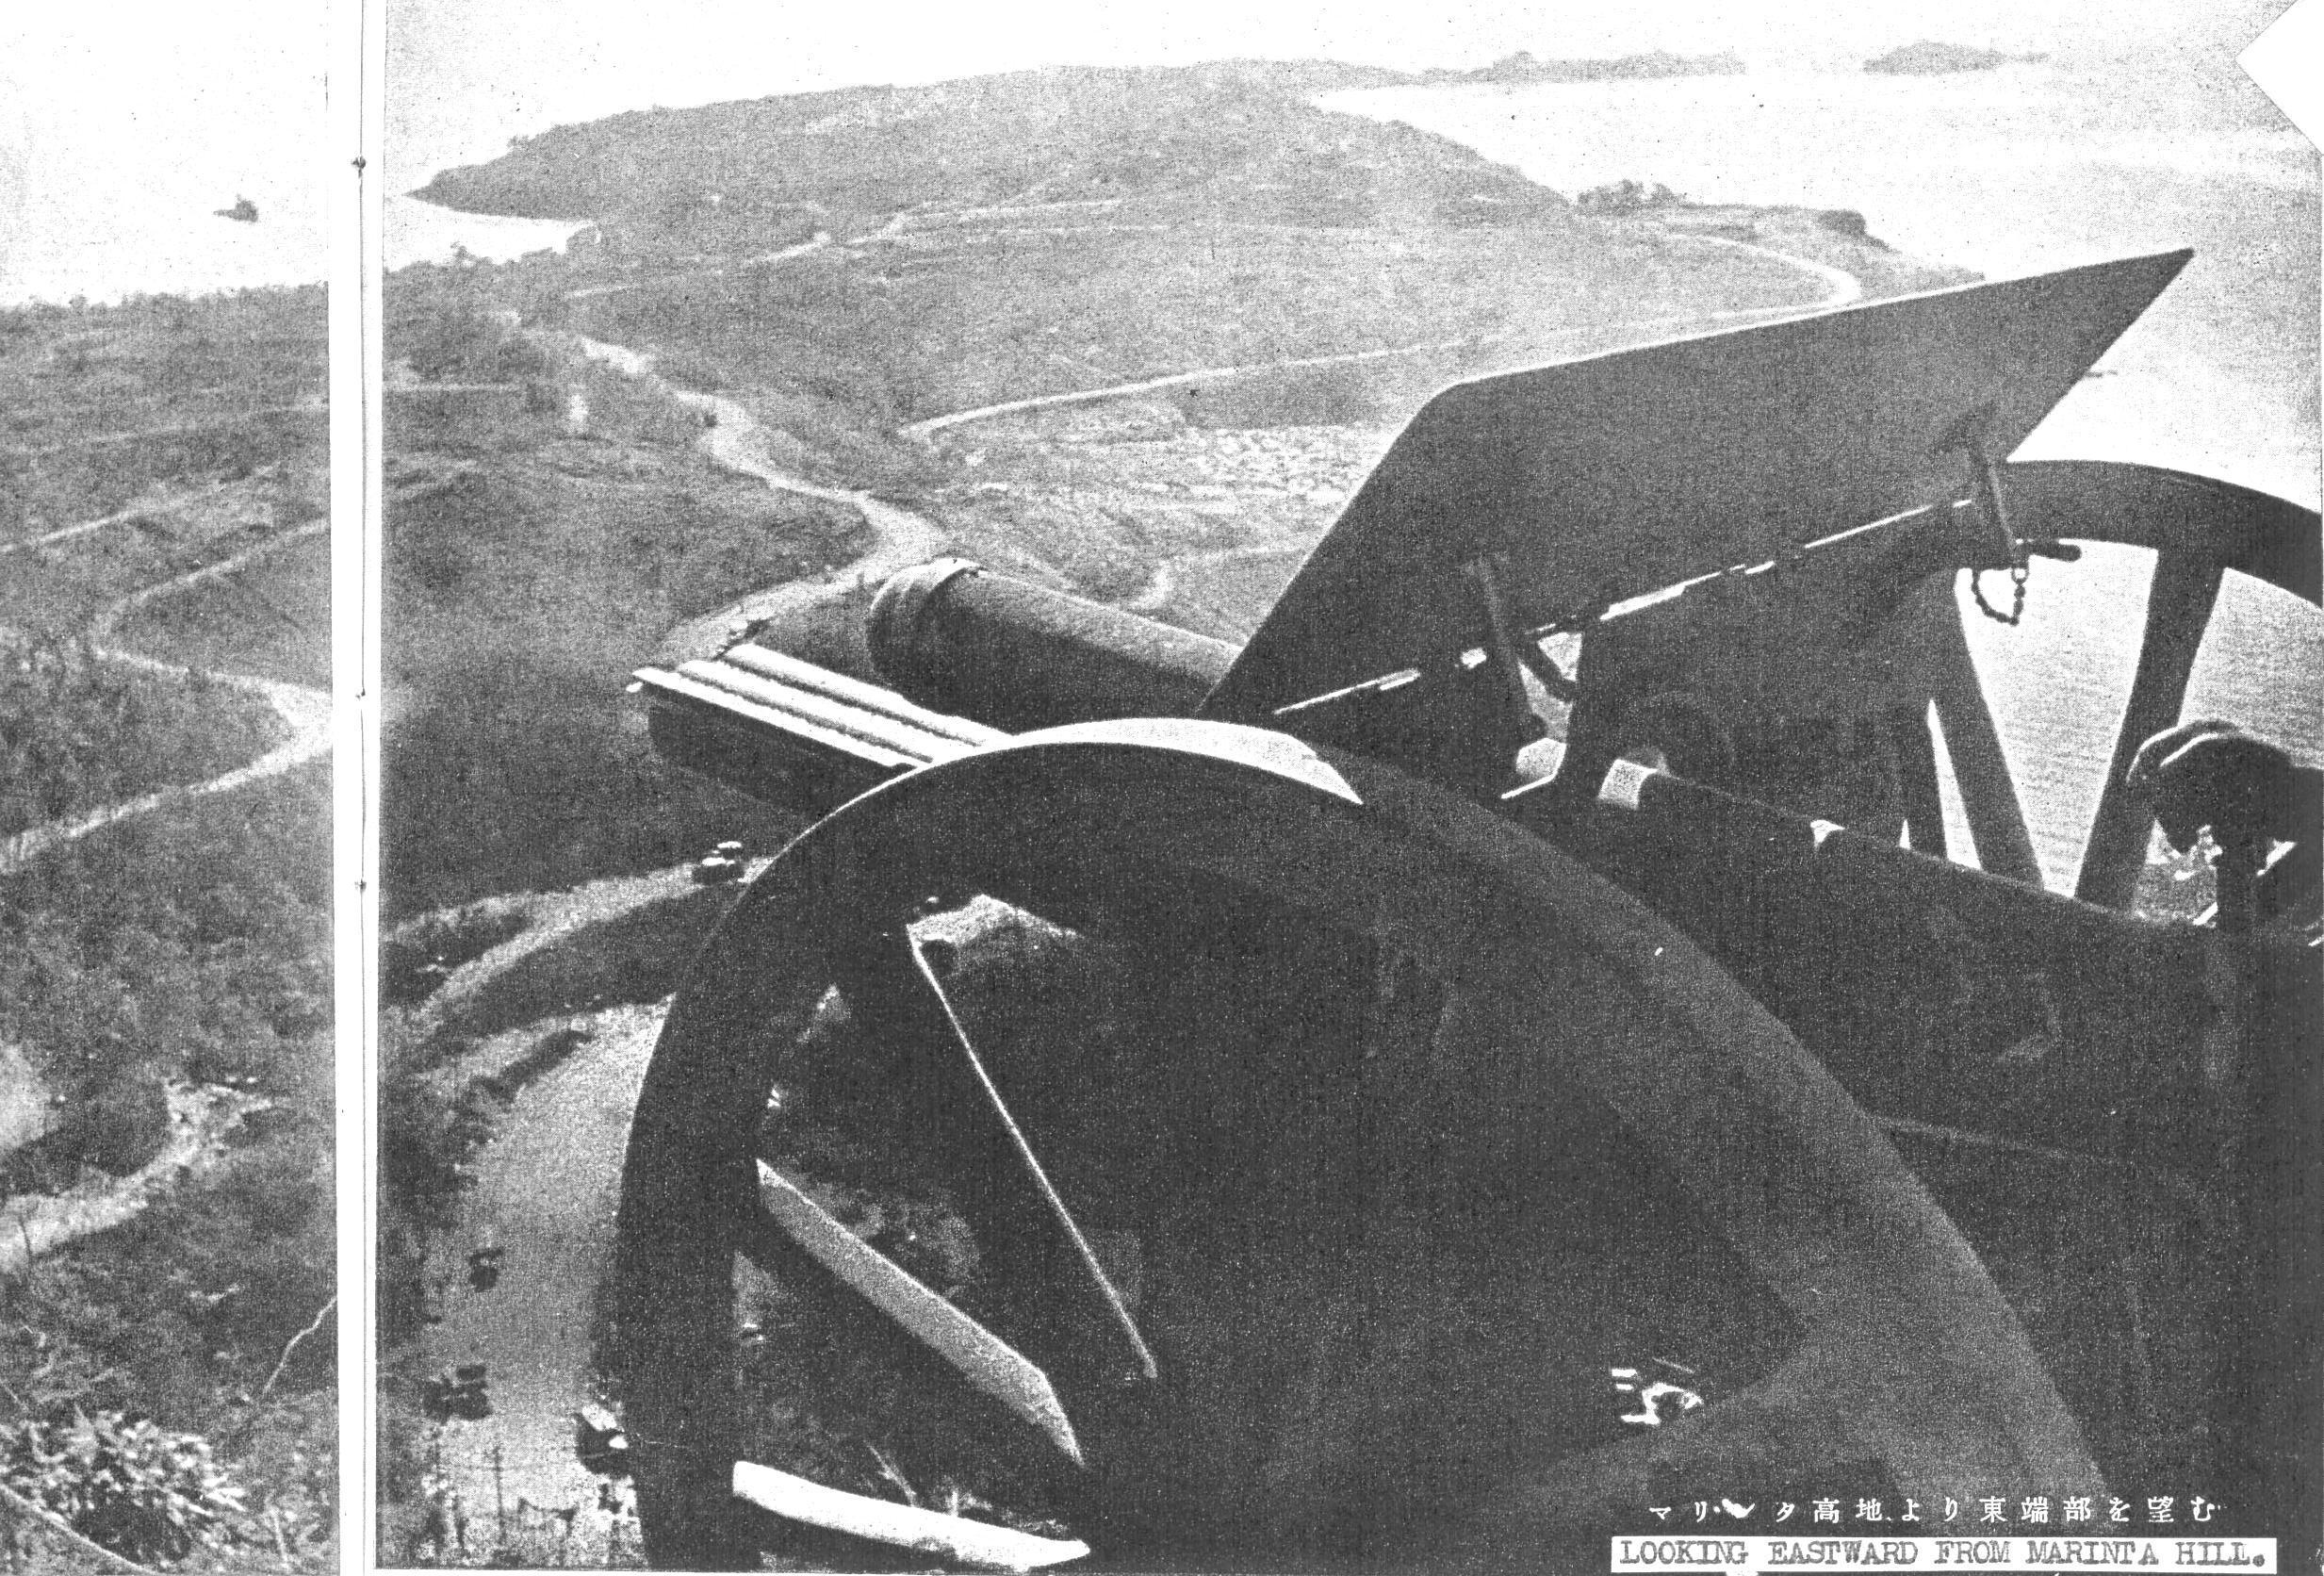 A 75mm howitzer gun crew photographed on Corregidor. A field unit such as this was Lt. Thomas James”Jimmy” Eugene Crotty’s final command. (www.Corregidor.org)